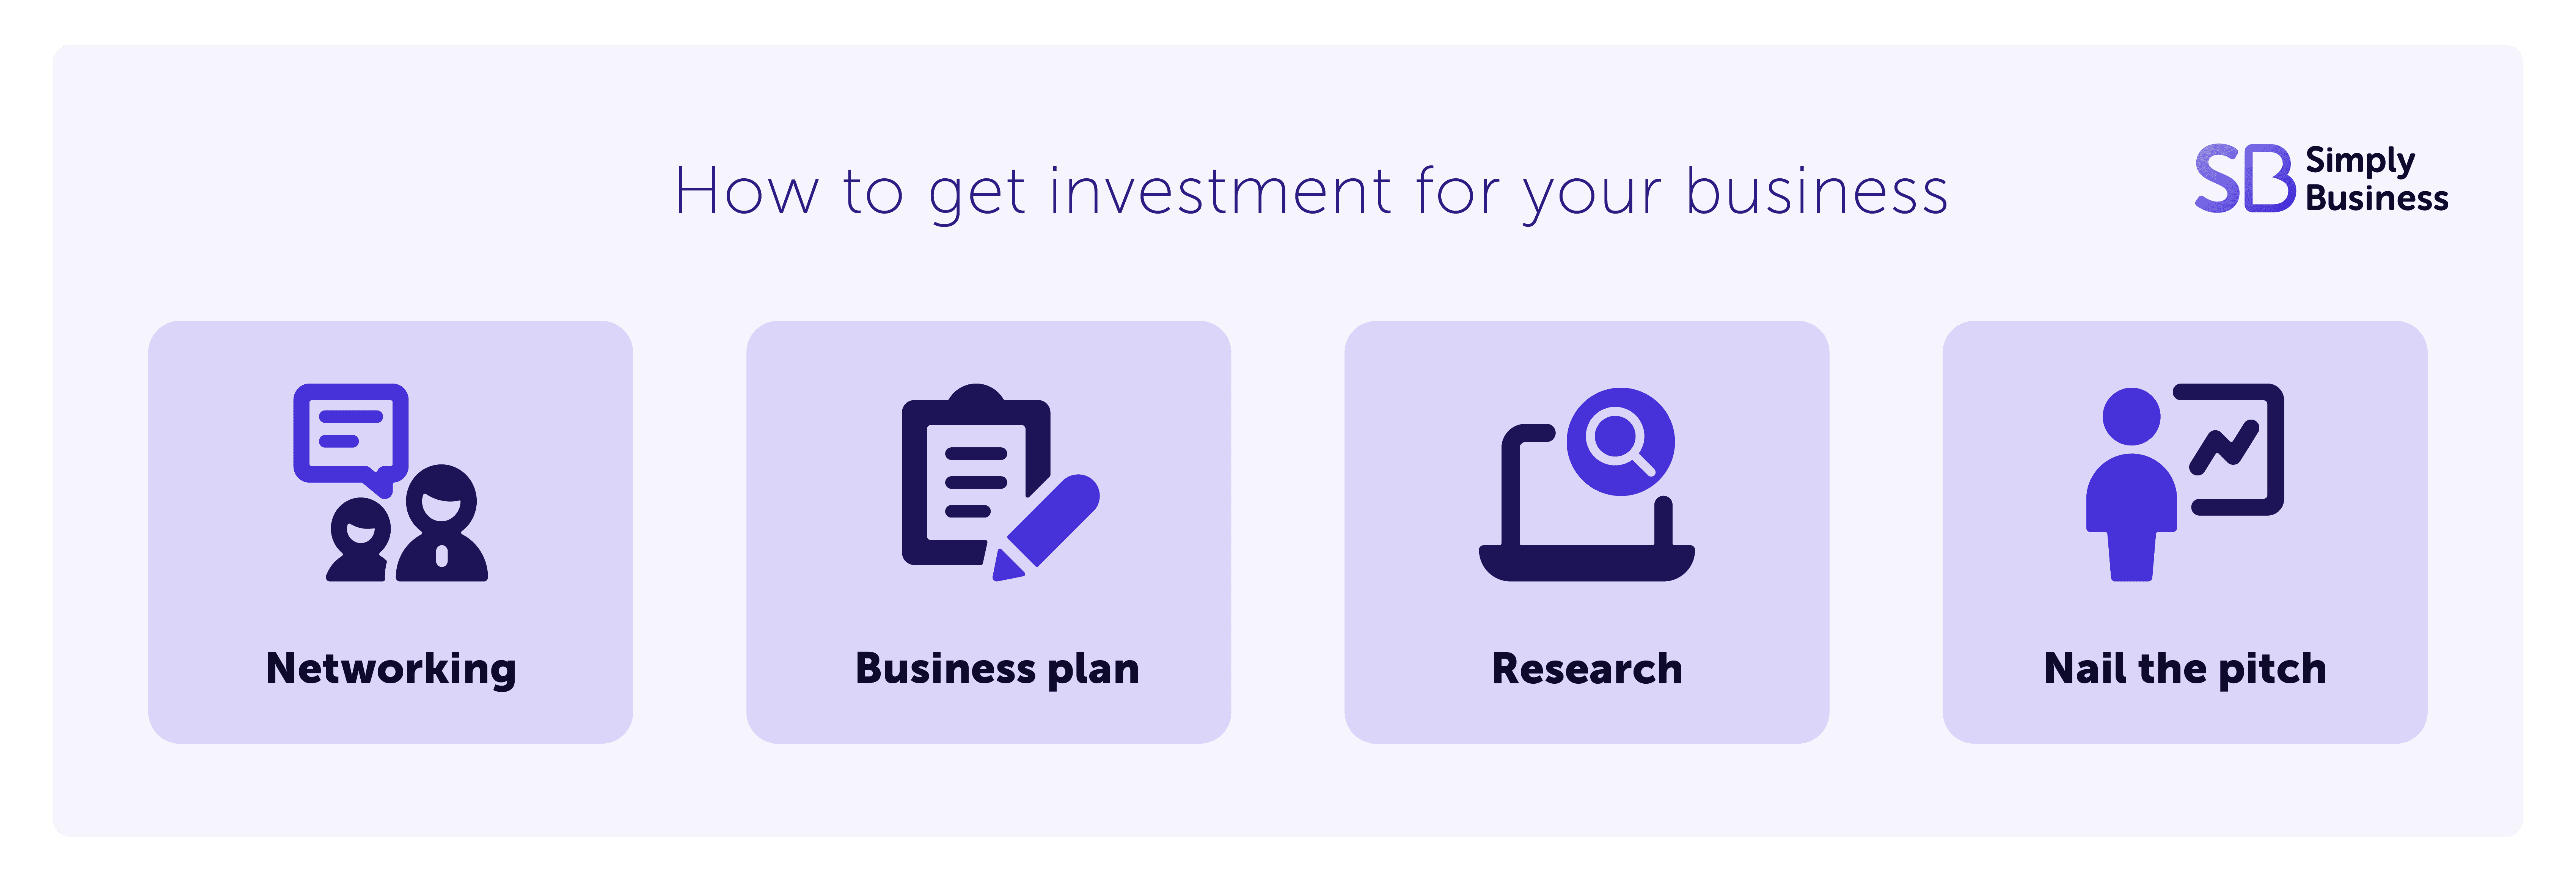 Infographic showing how to get investment for your business